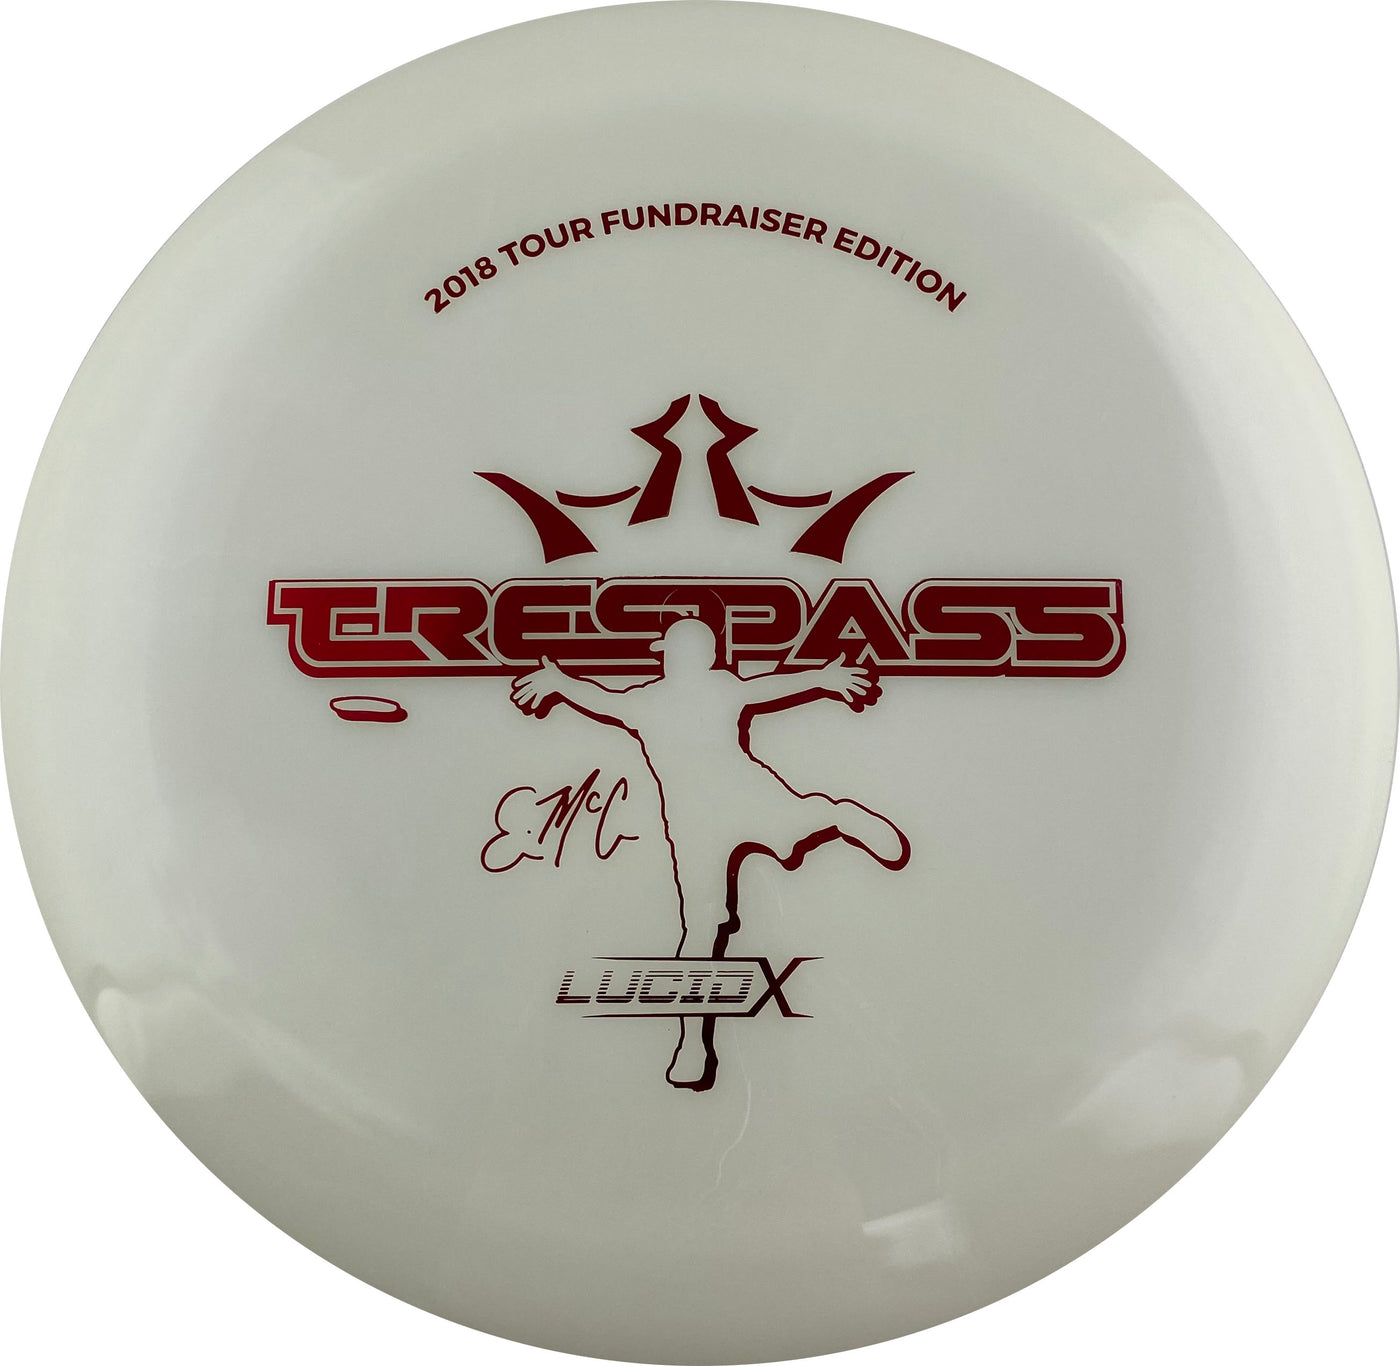 Dynamic Discs Lucid-X Trespass Distance Driver with 2018 Tour Fundraiser Edition - Eric McCabe - Emac Stamp - Speed 12